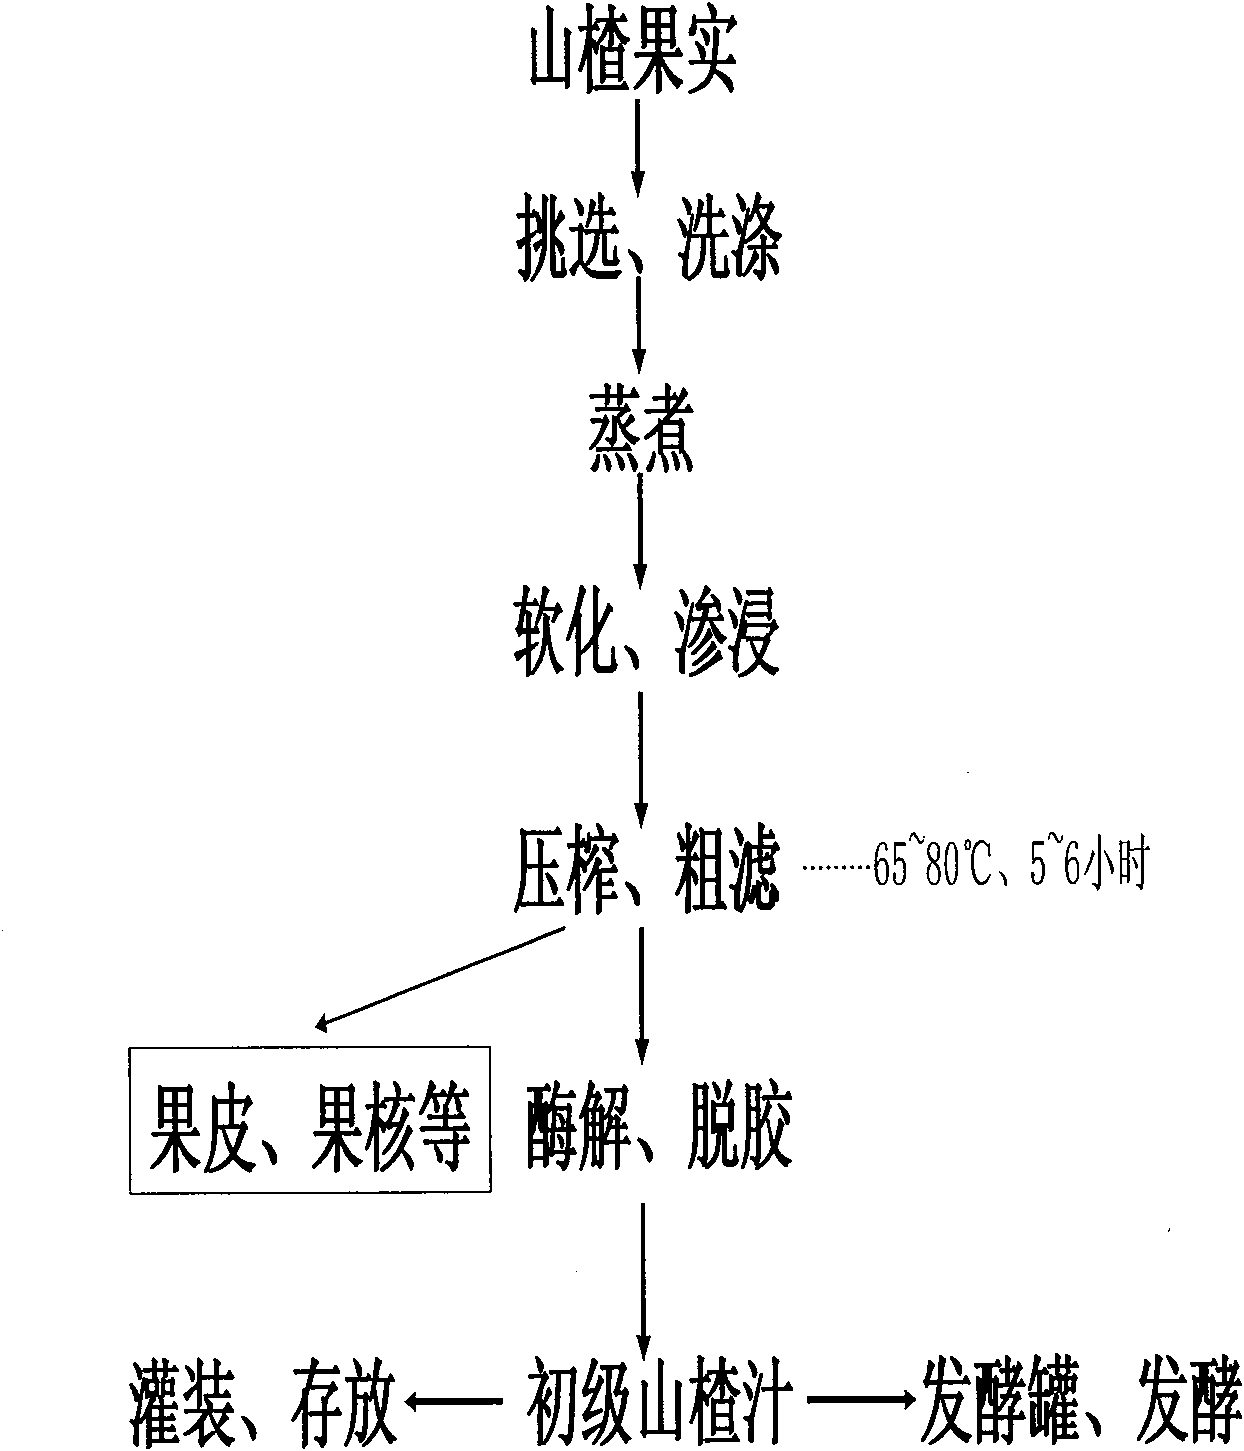 Method for producing refined pure hawthorn extract tablets